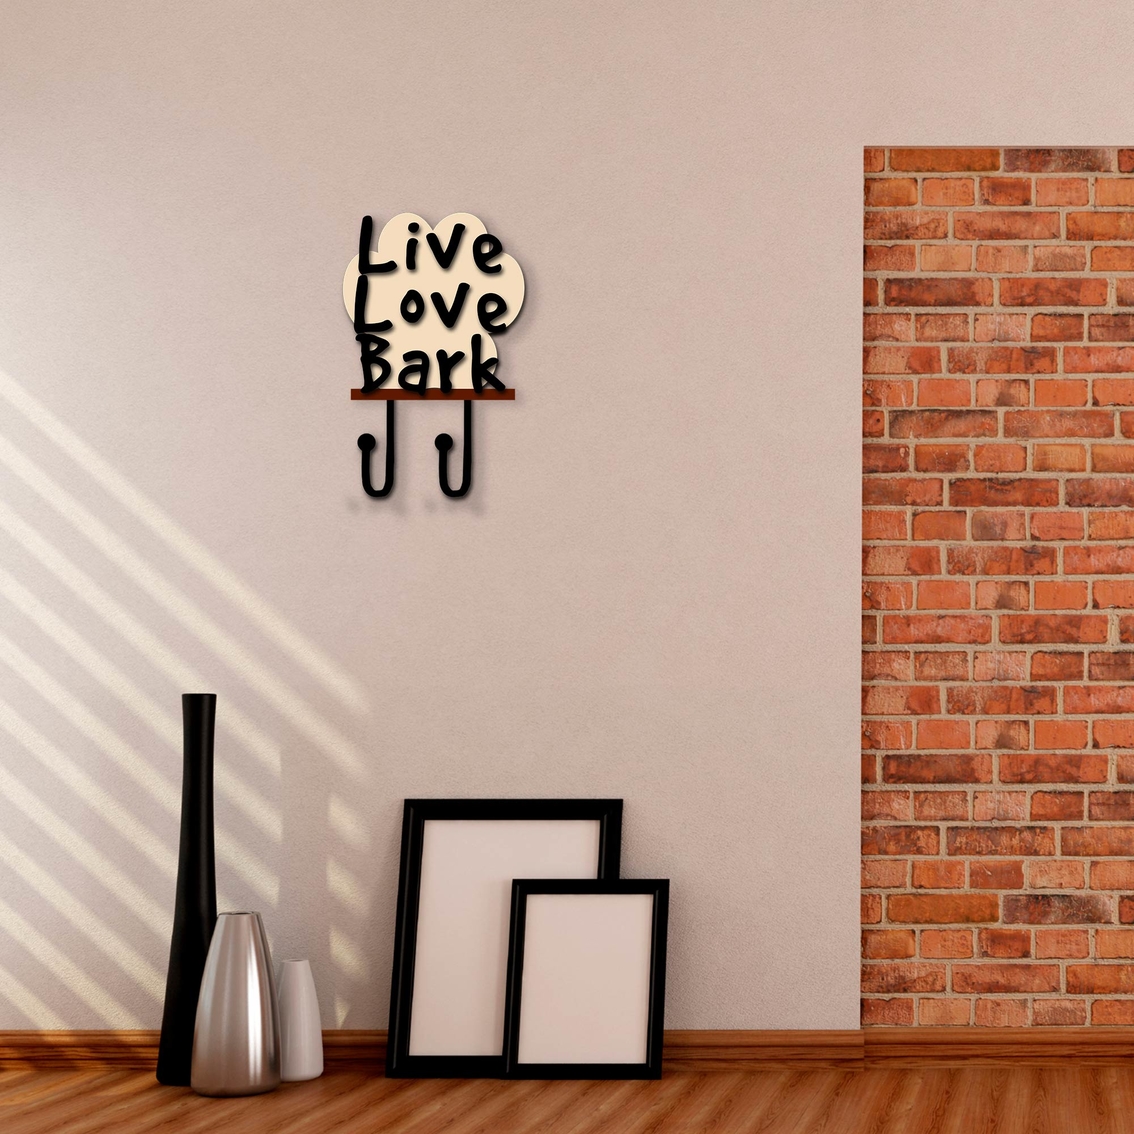 PTM Images Live Love Bark Decorative Wall Art 7 x 11 - Image 2 of 2